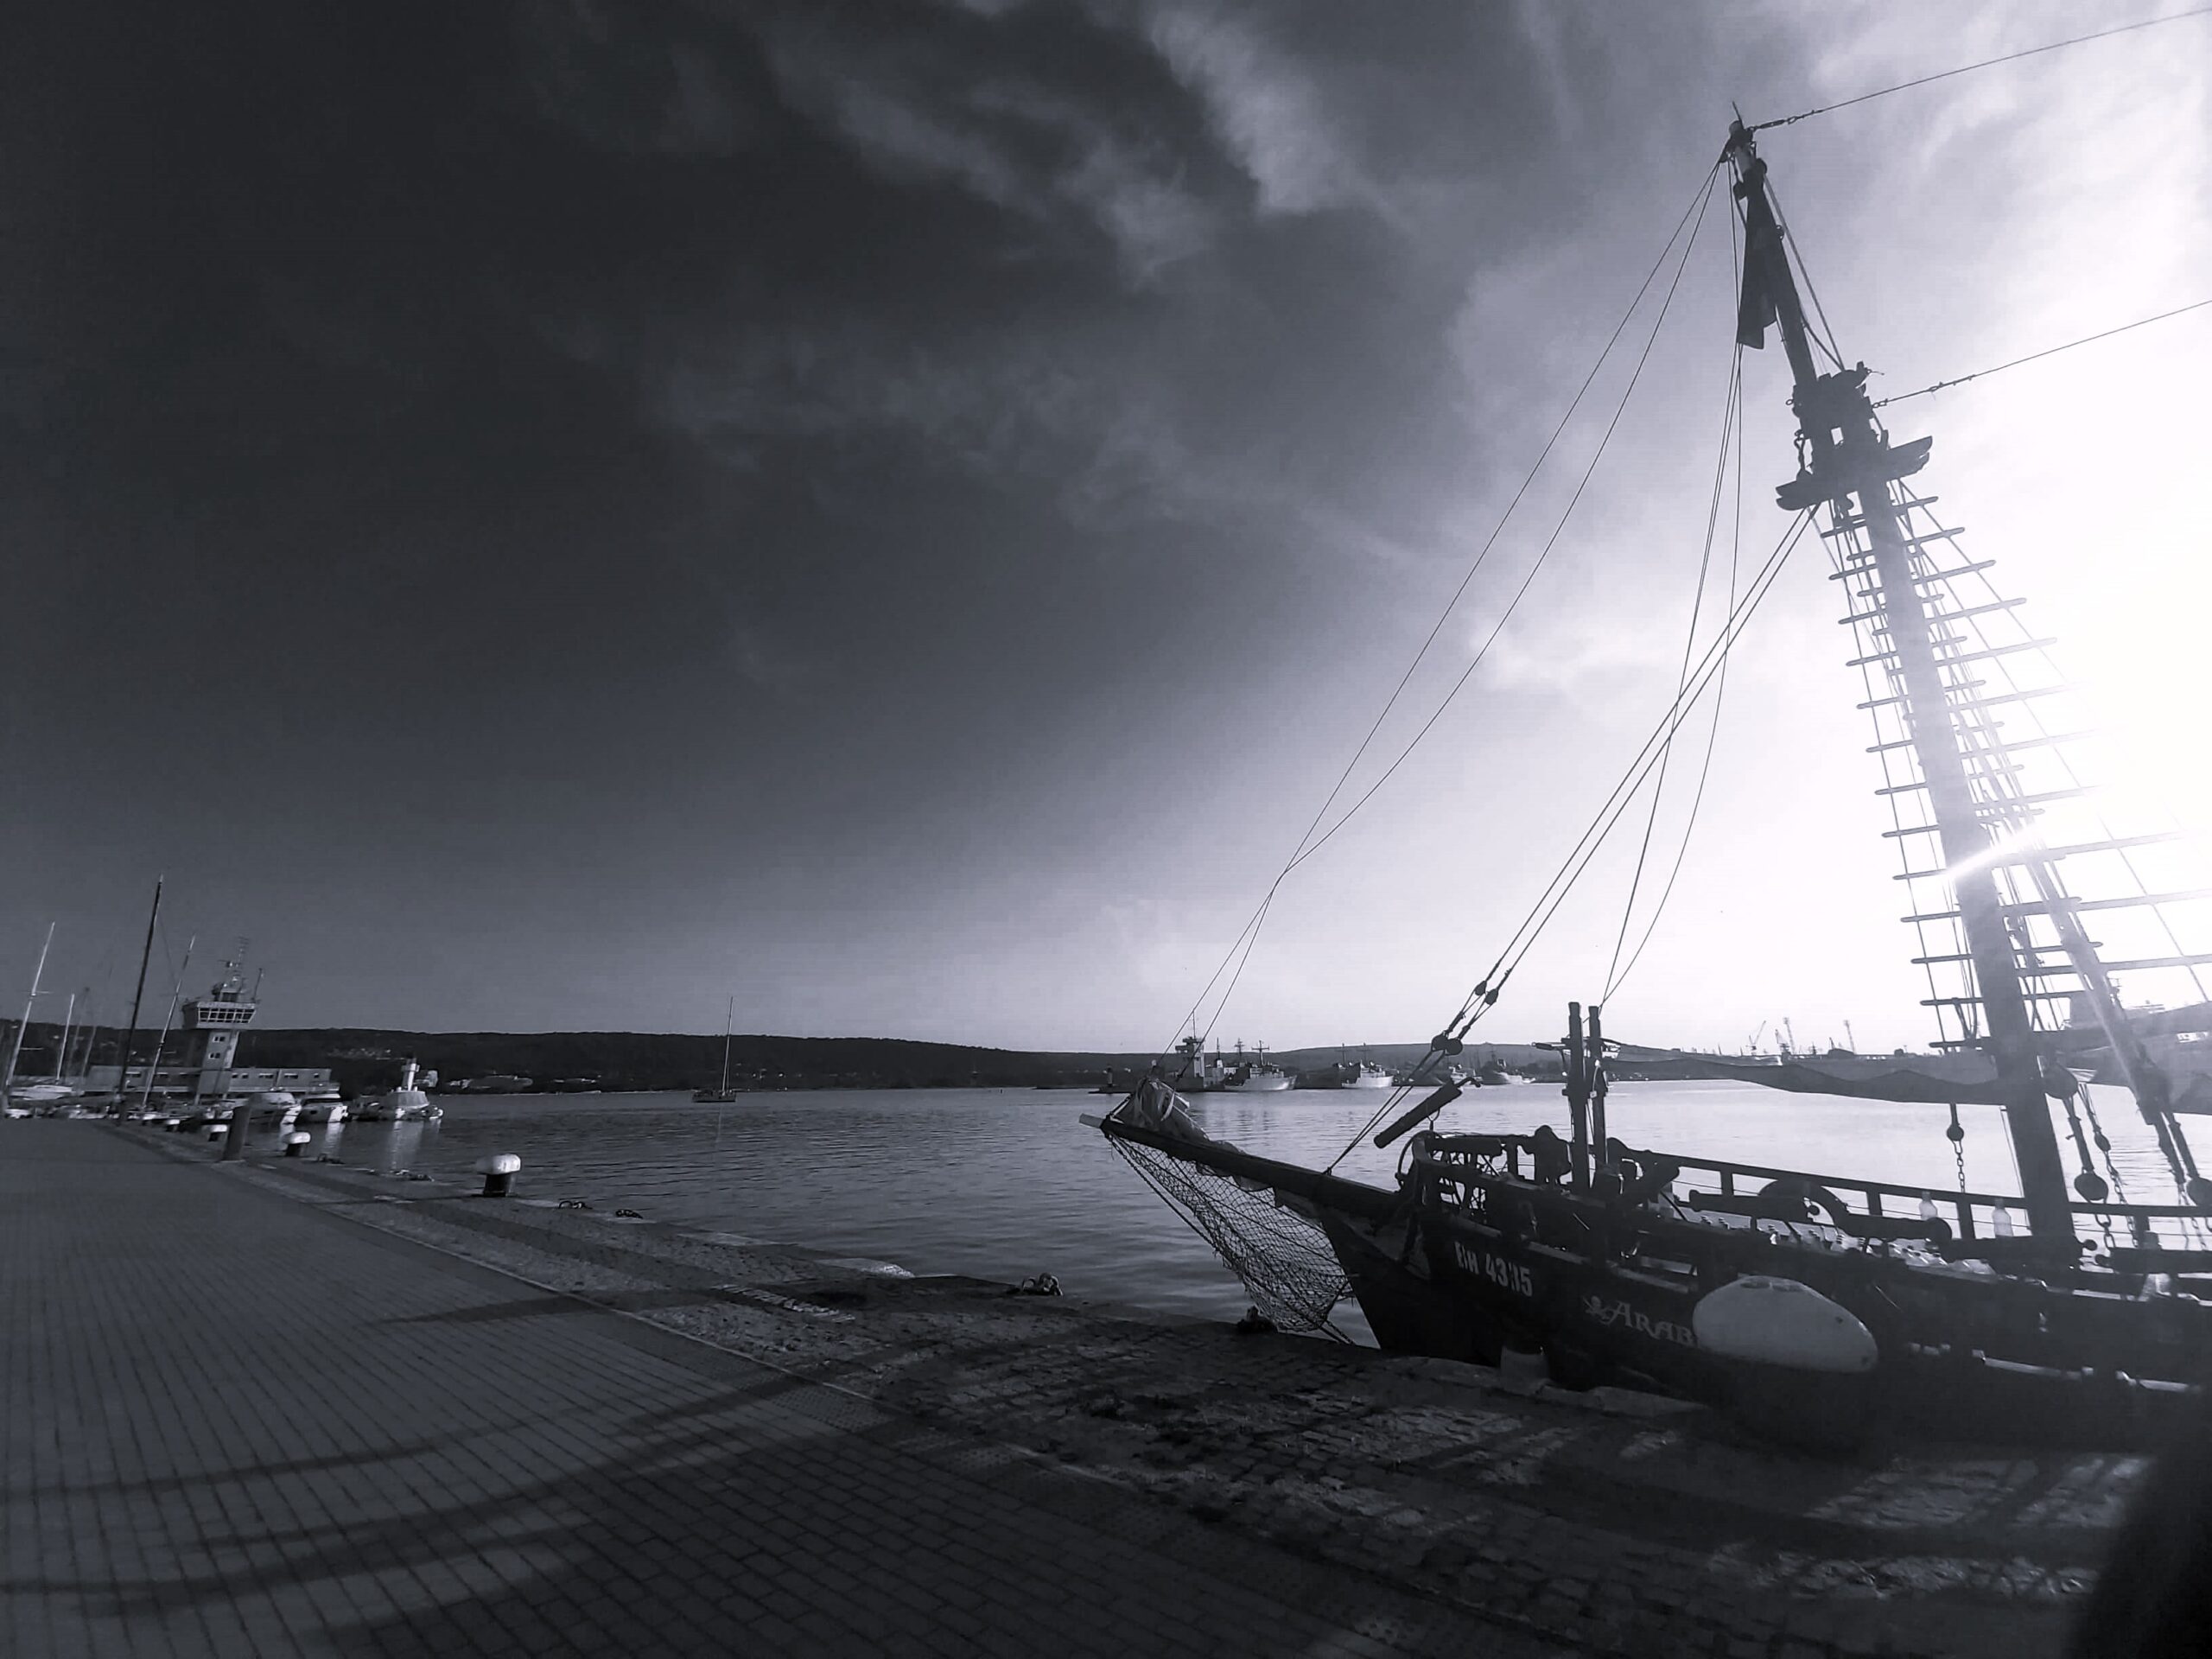 A black and white picture of a docked boat, Varna, Bulgaria